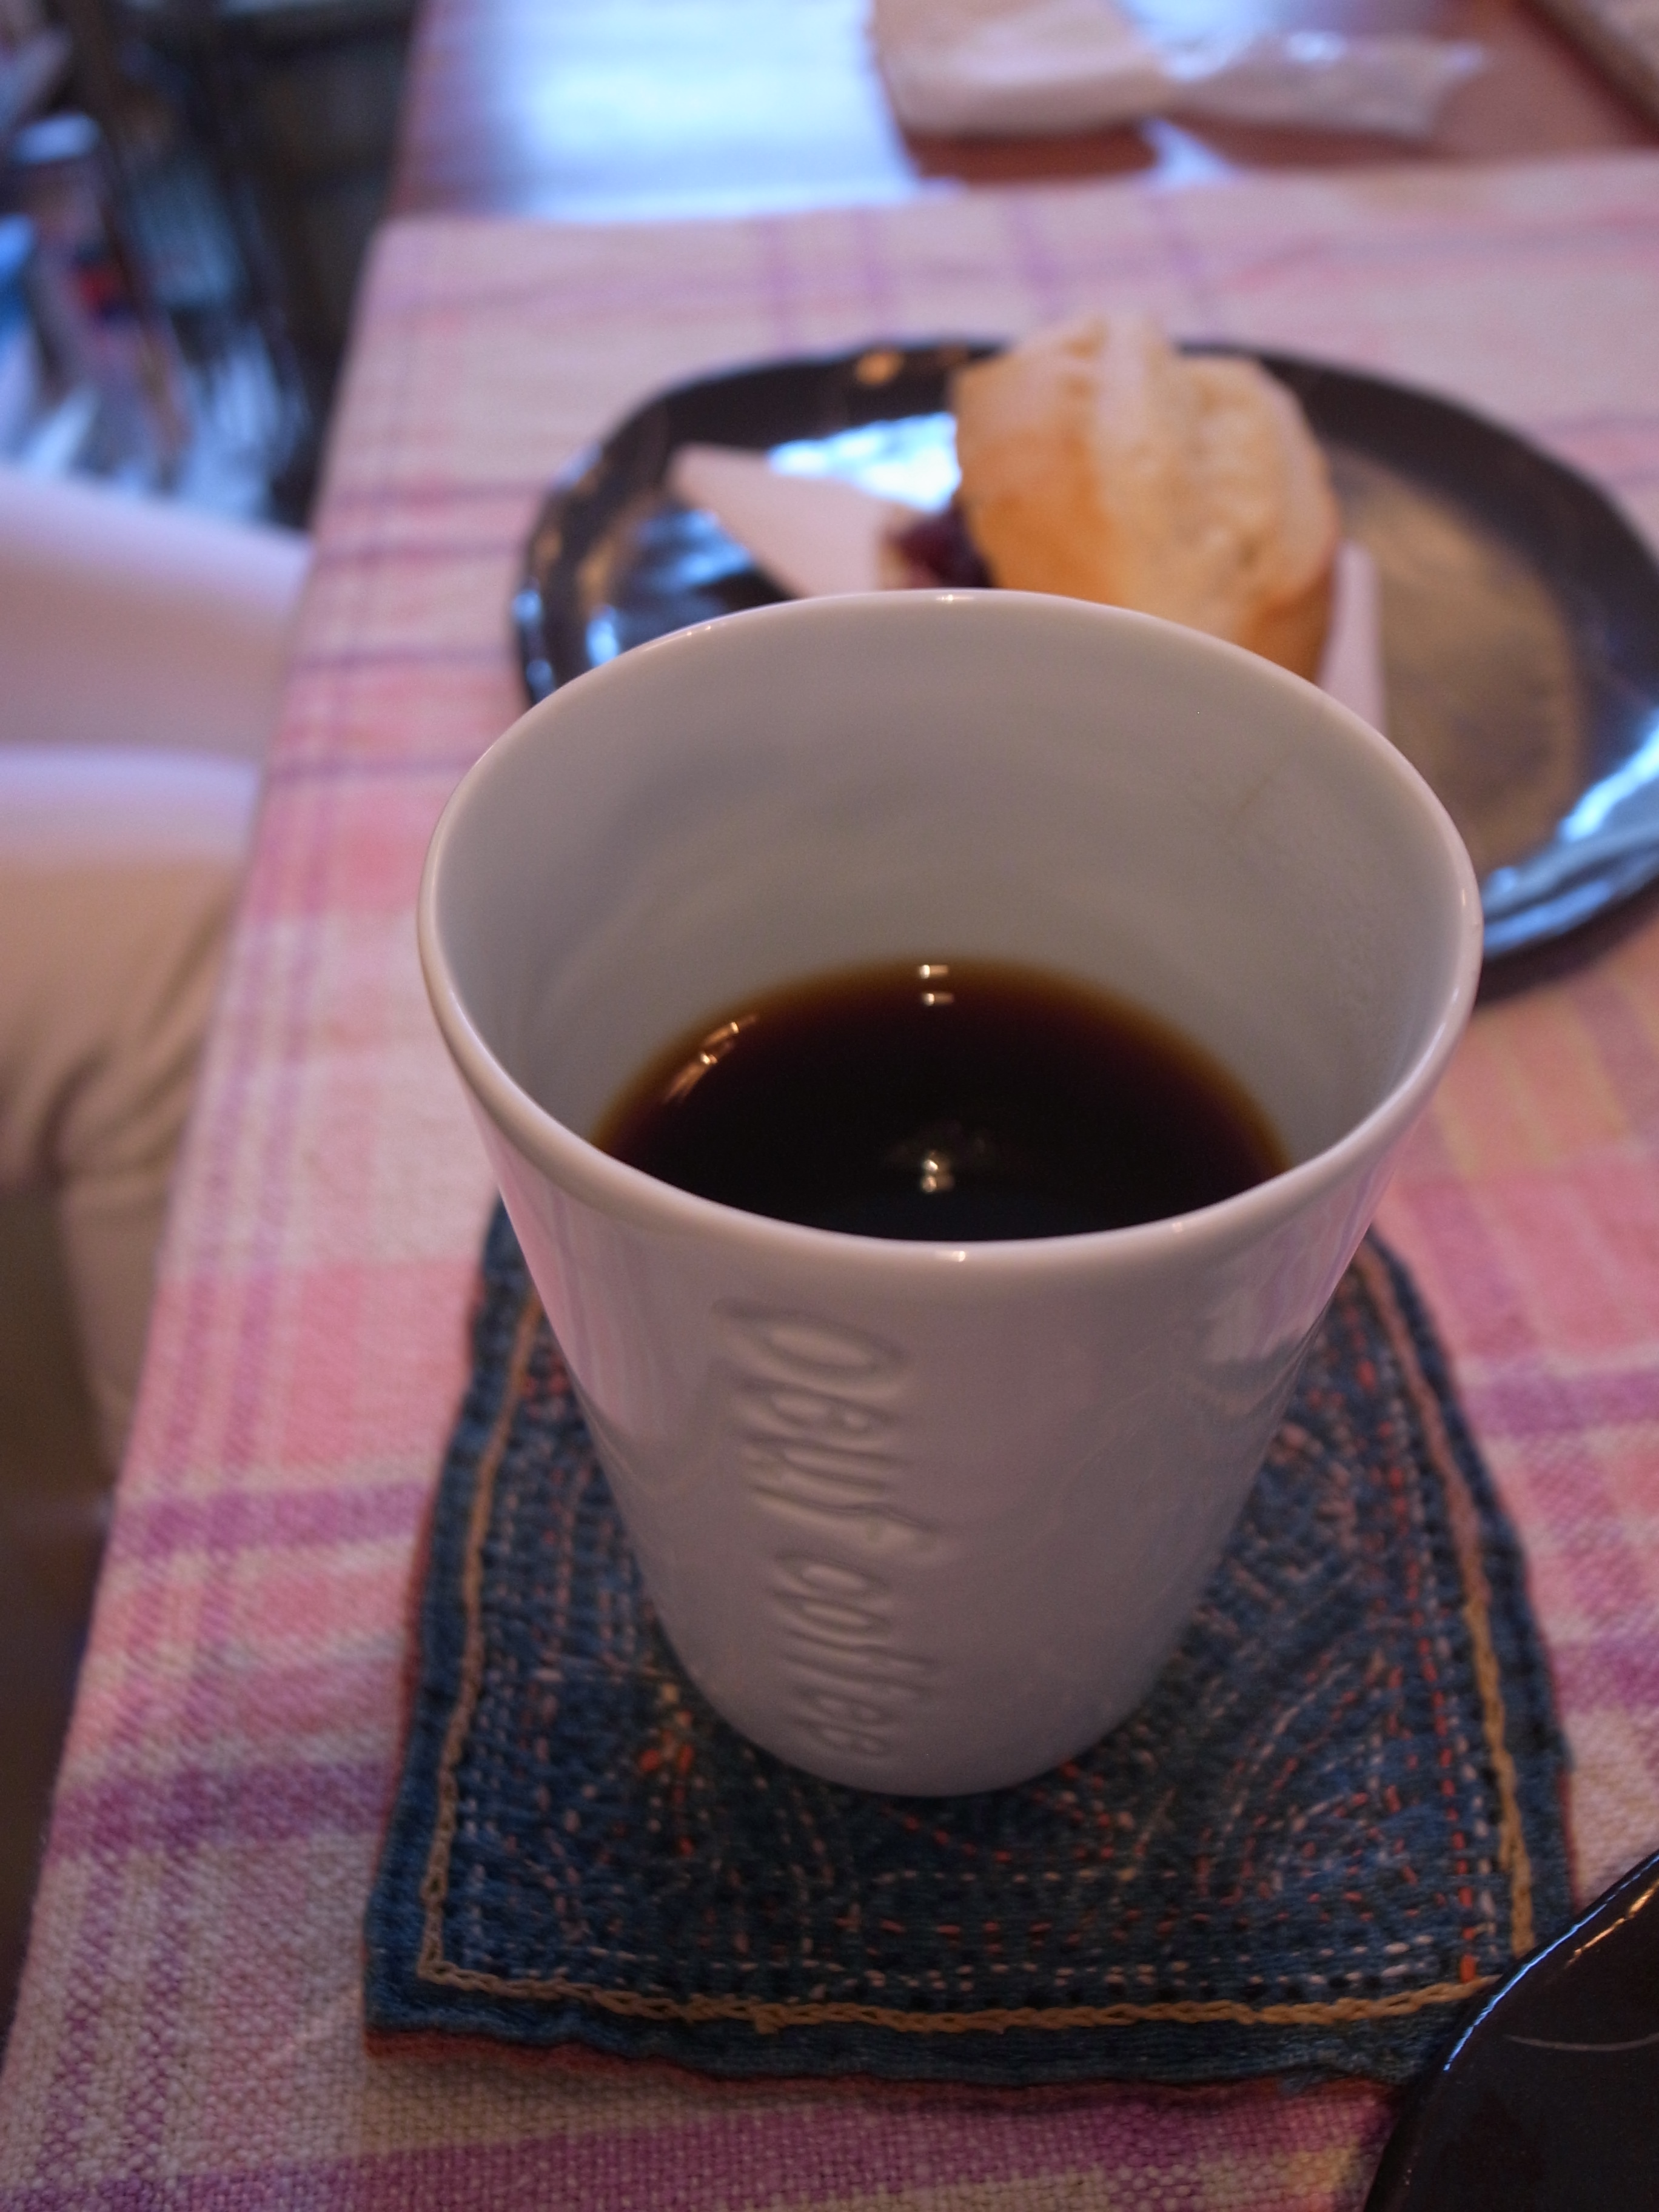 00_08_a cup of coffee.JPG